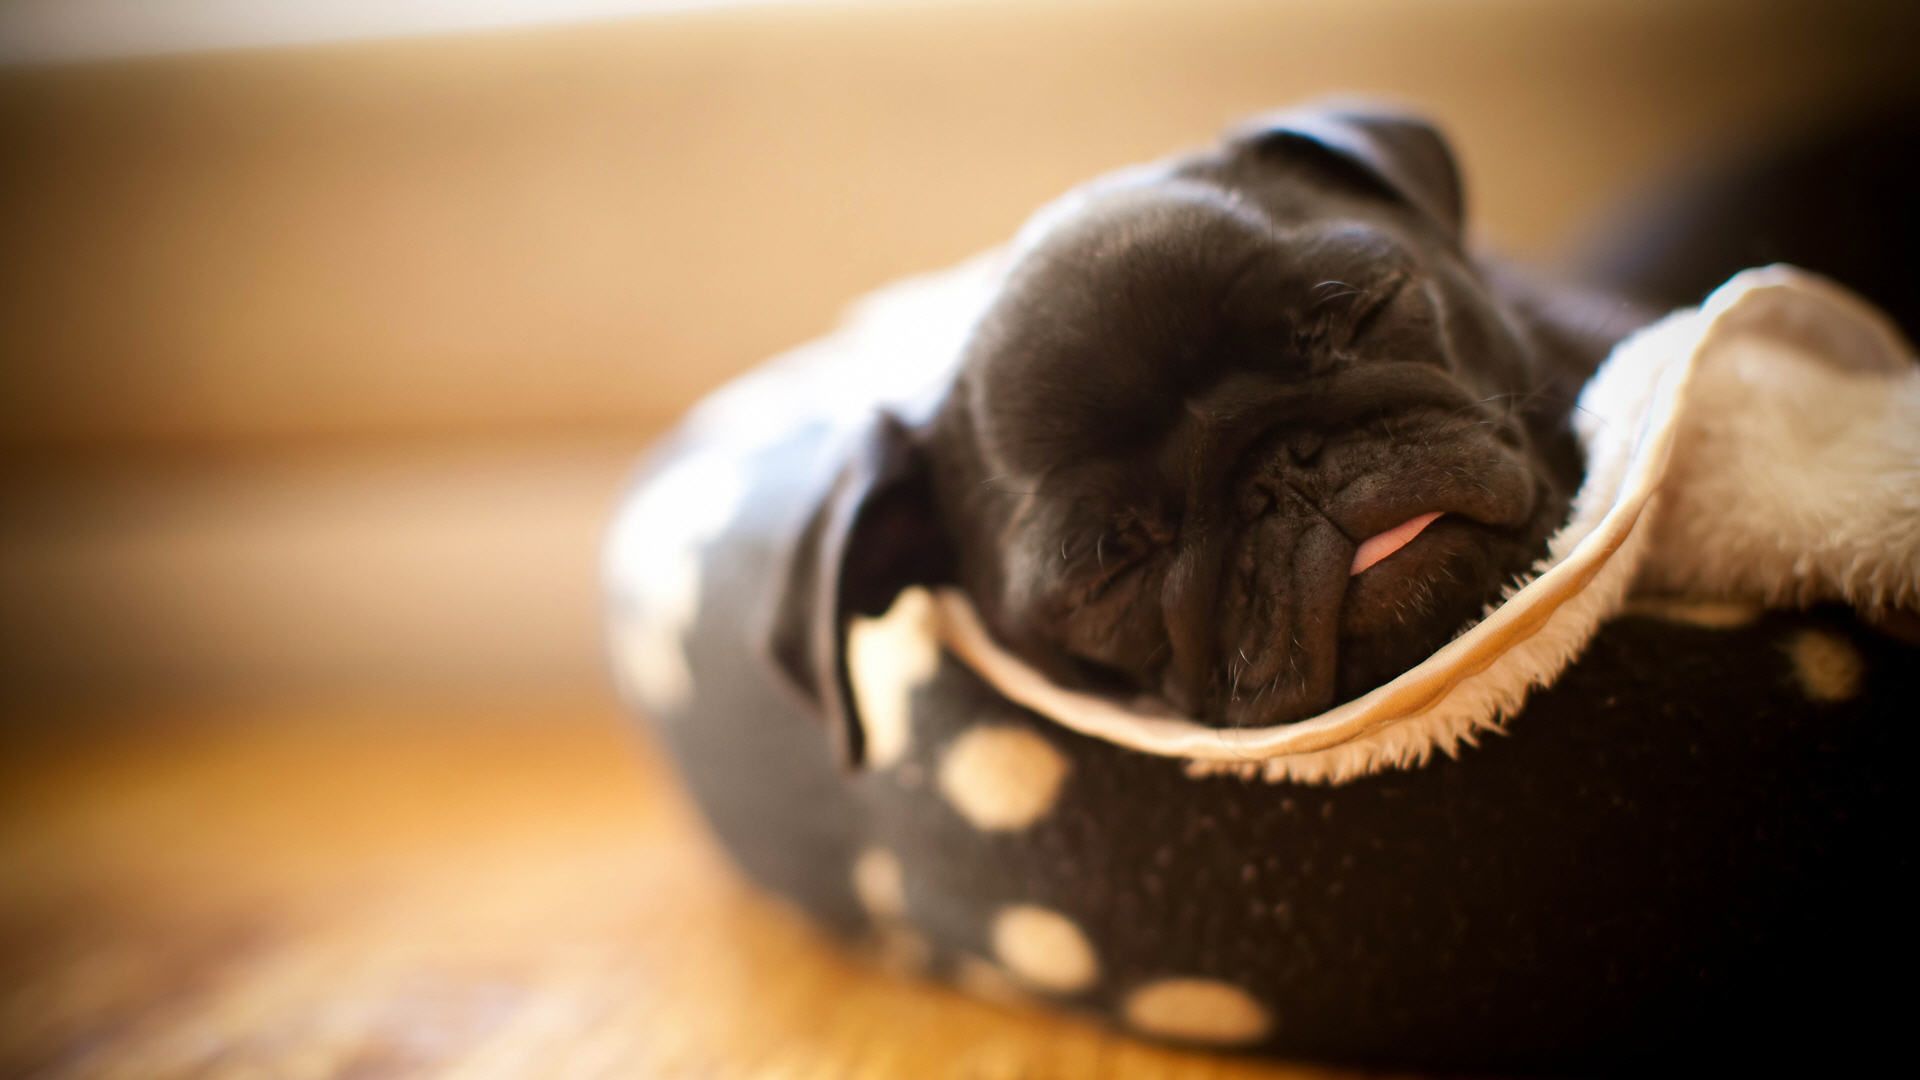 HD wallpaper, Pictures, Pug